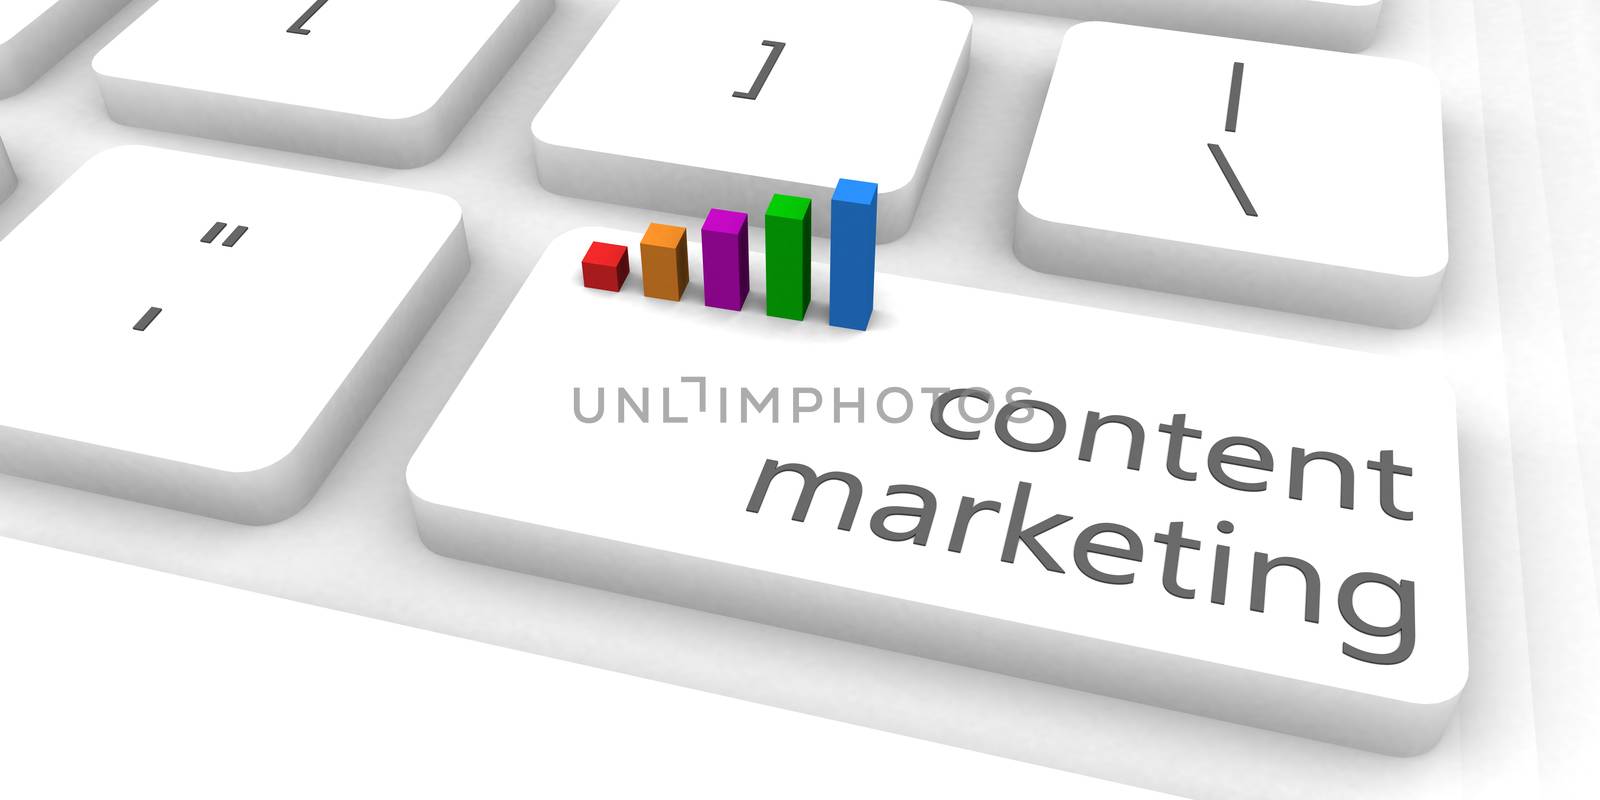 Content Marketing as a Fast and Easy Website Concept